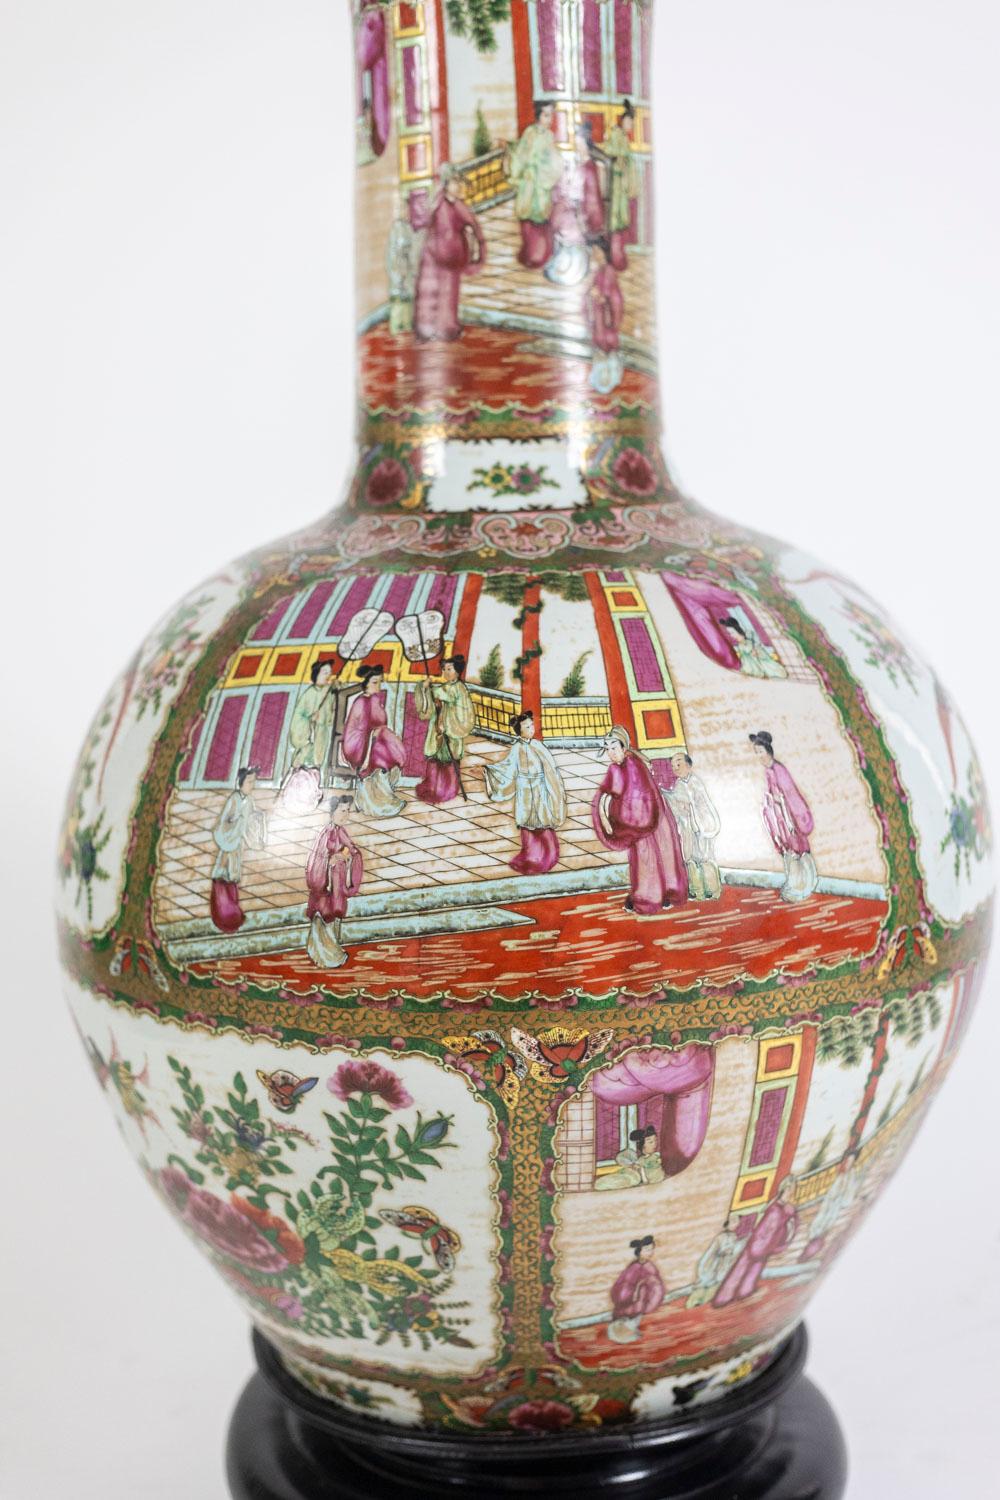 Pair of large vases with swollen bodies, or potiches, in Canton porcelain, with polychrome decorations of court scenes with characters dressed in traditional clothing represented in a palace, birds and flowers.
Each vase presents an alternation of